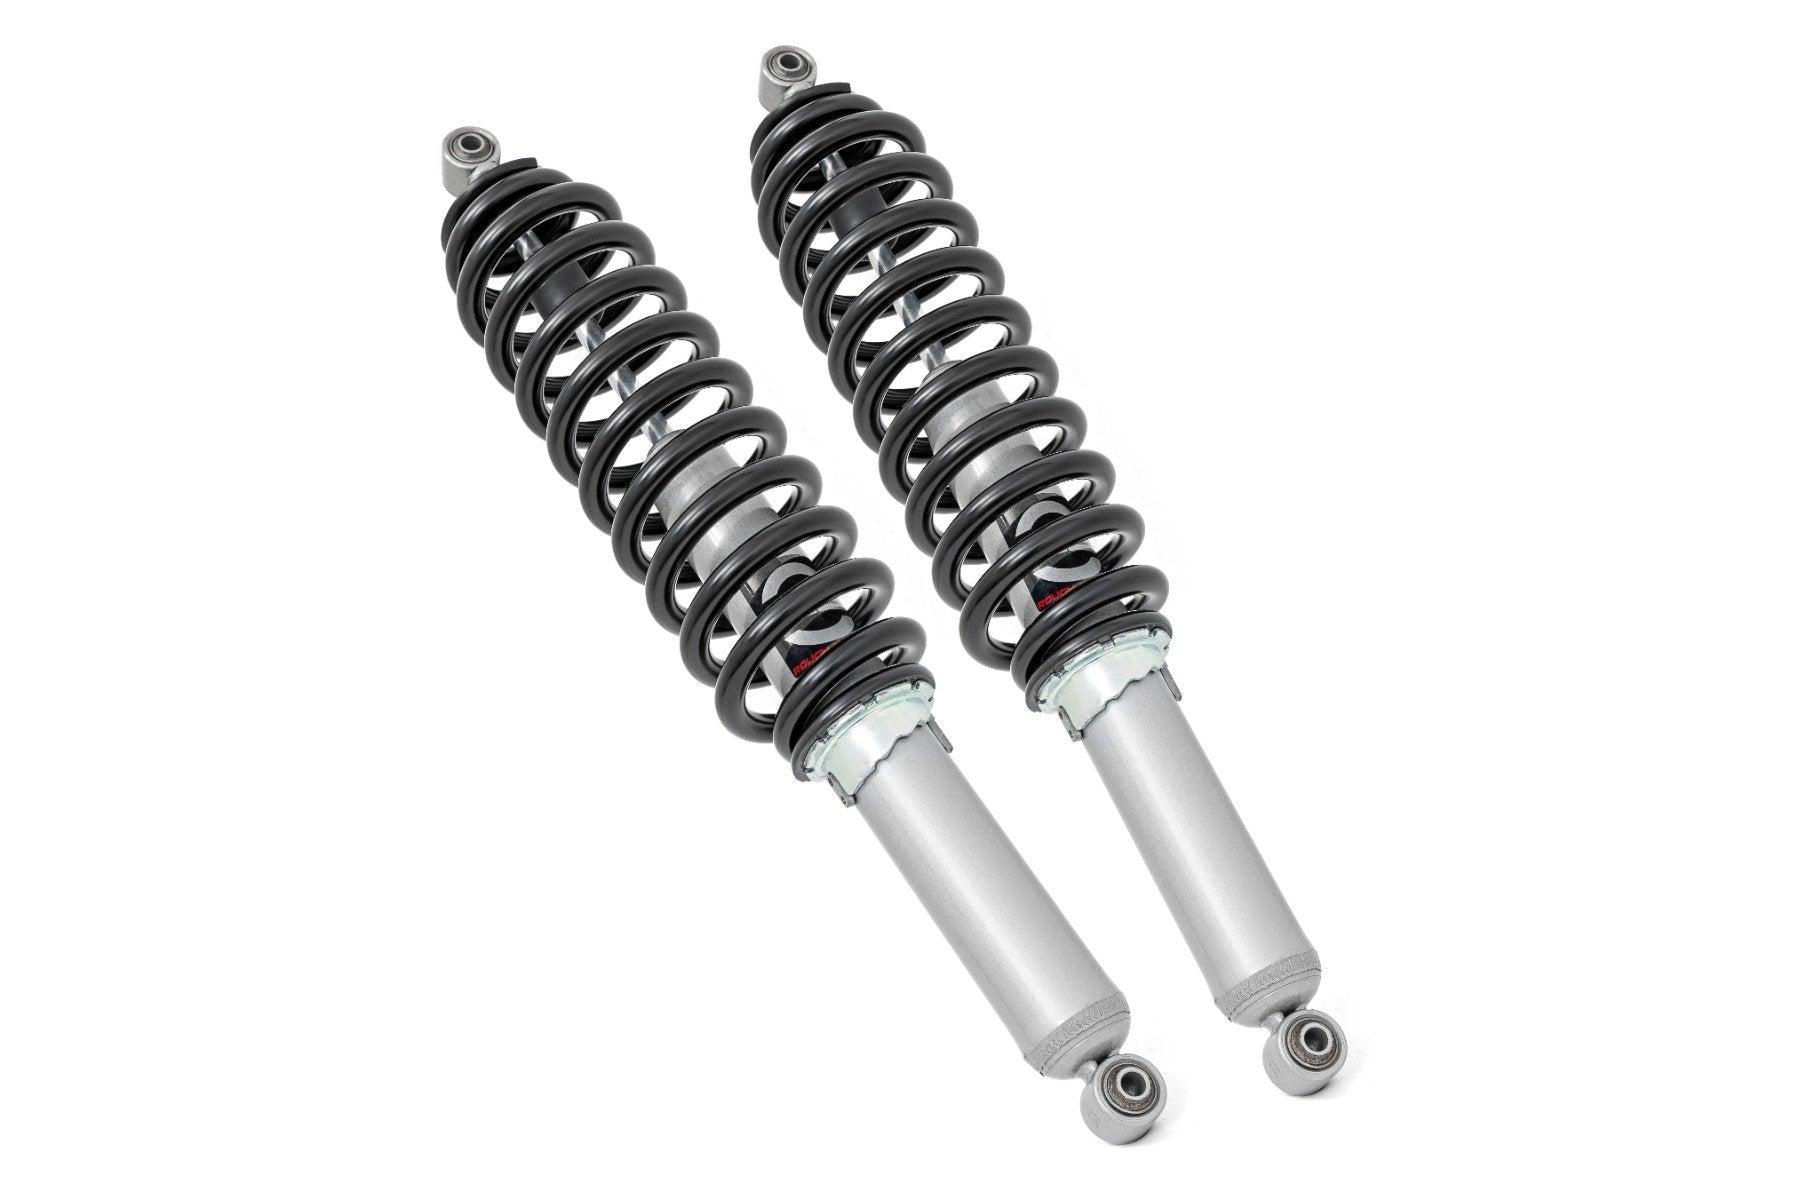 N3 Rear Coil Over Ranger Shocks – | Stock & Polaris Offroad Performance | Extreme